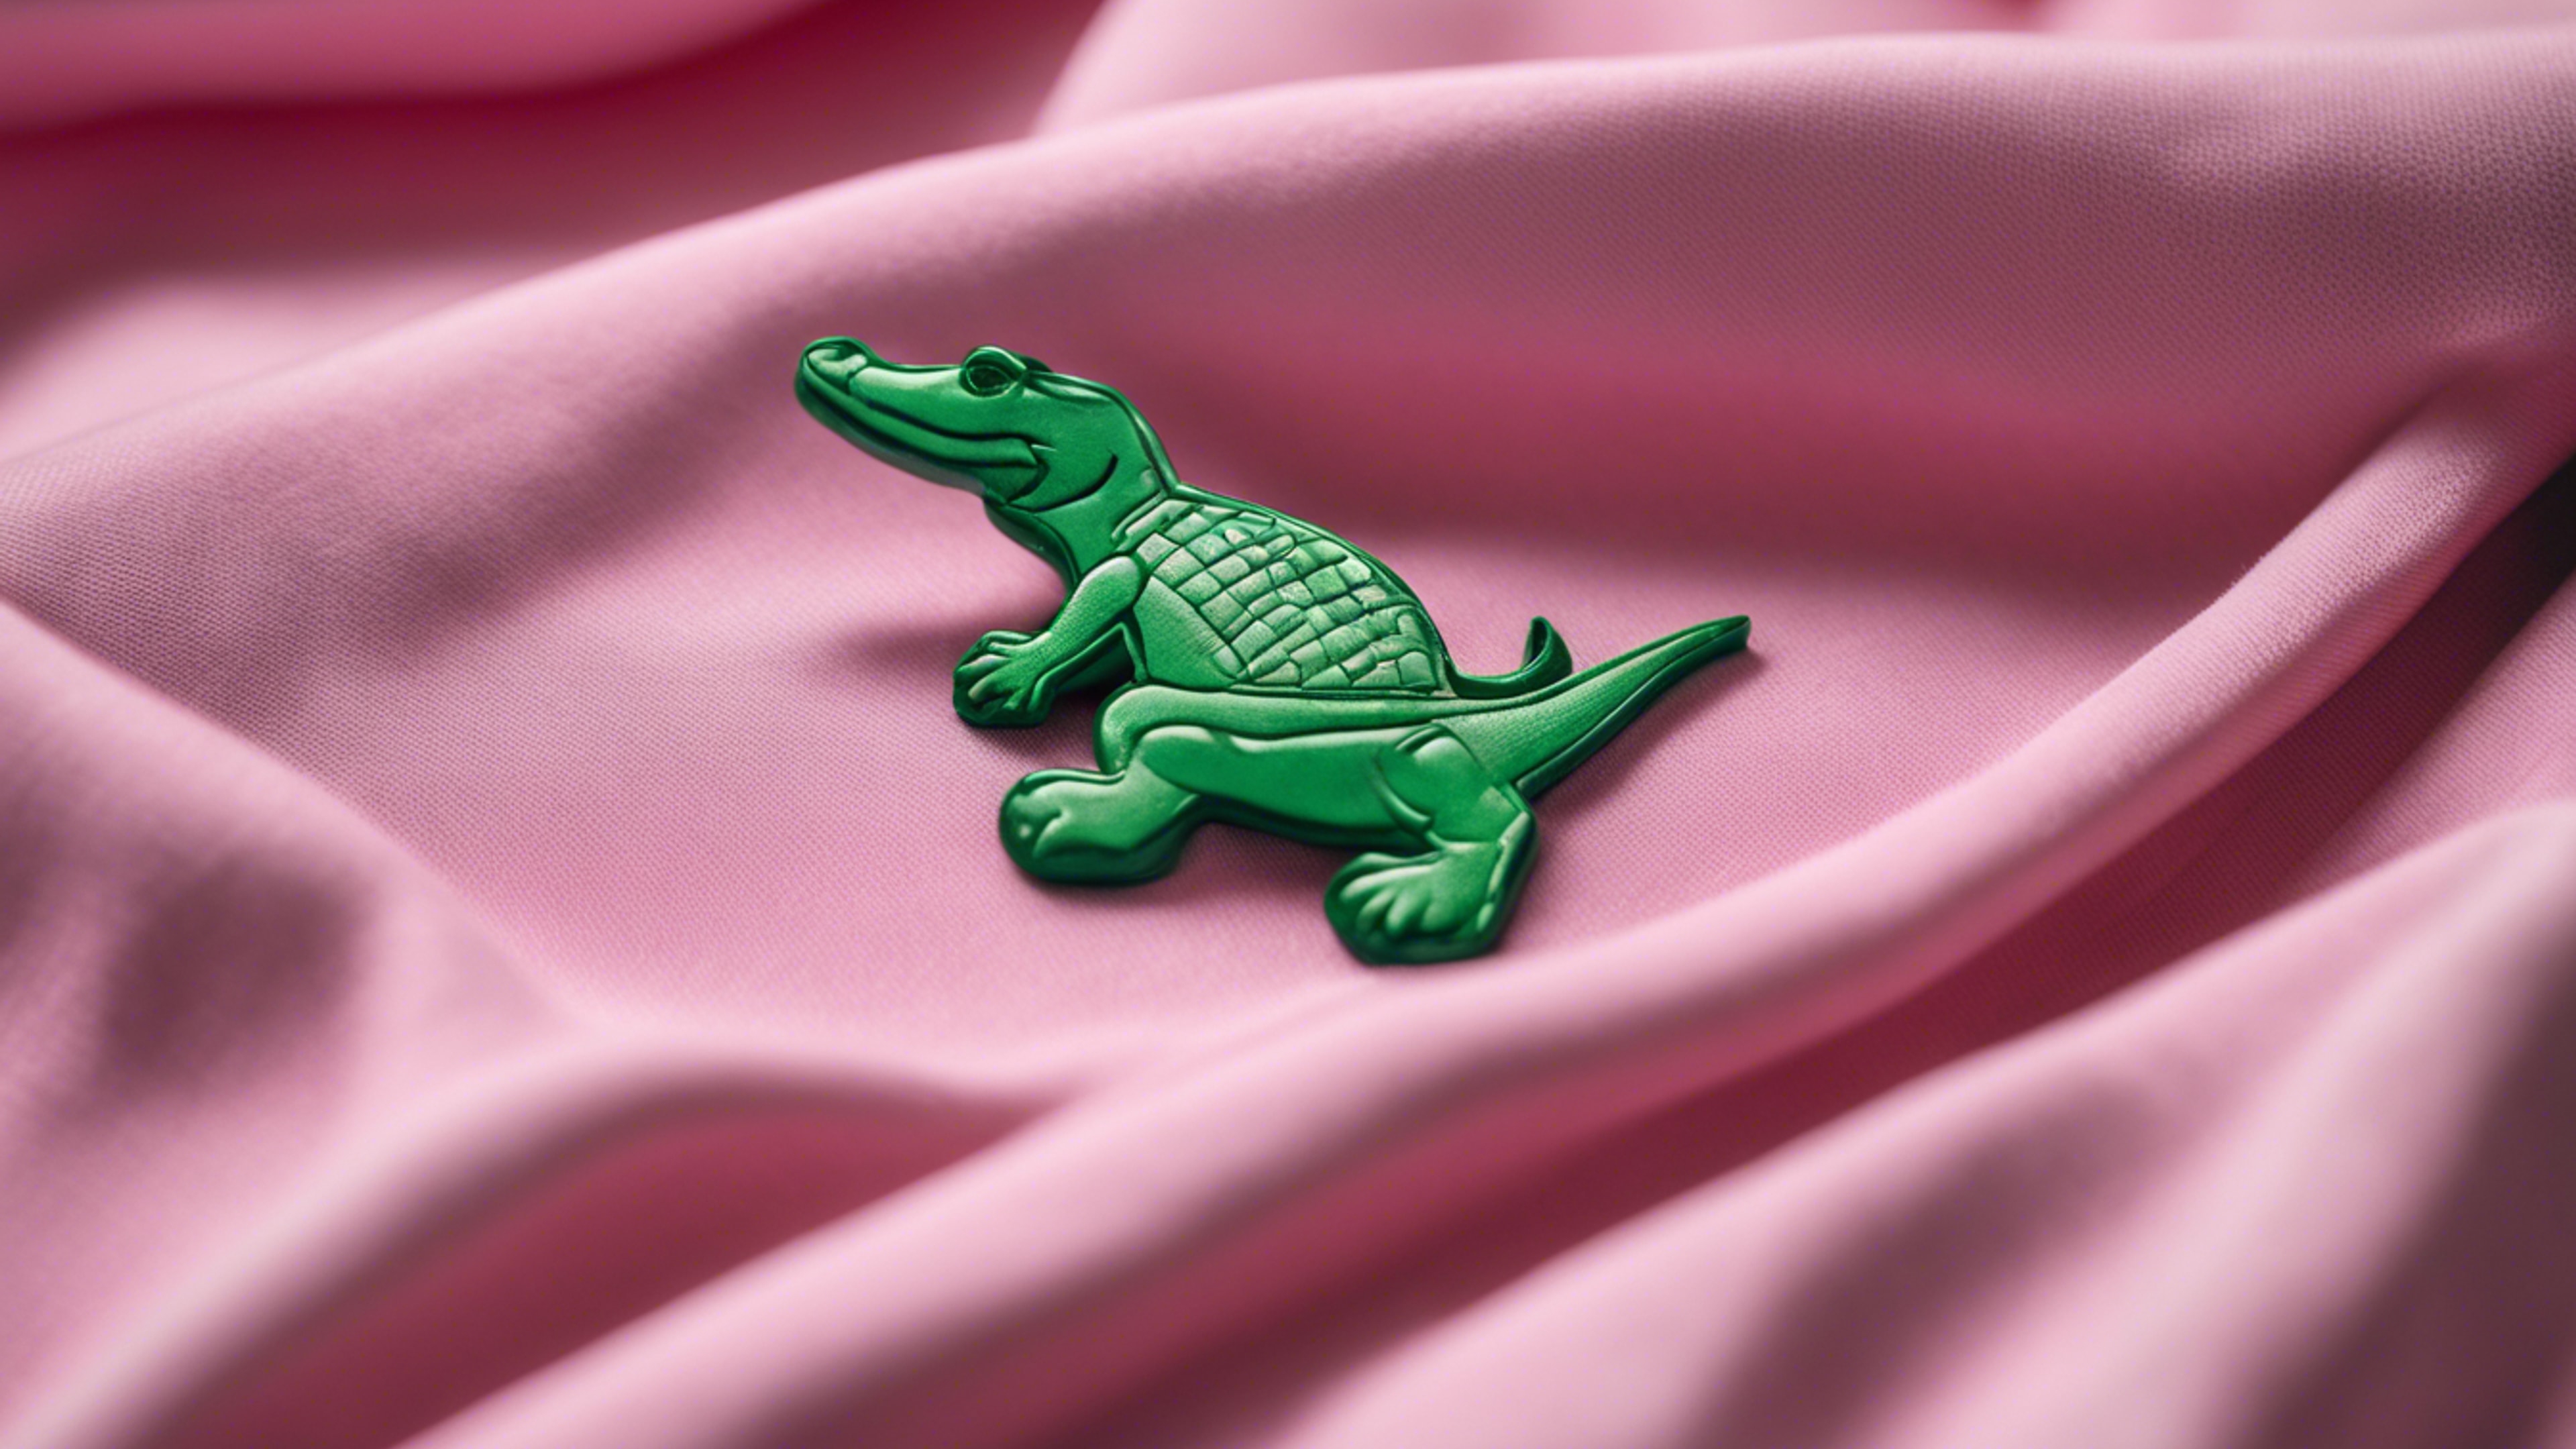 A pink polo shirt with a green alligator logo, folded neatly on a bed. 벽지[63d9ff960abf421e89a8]